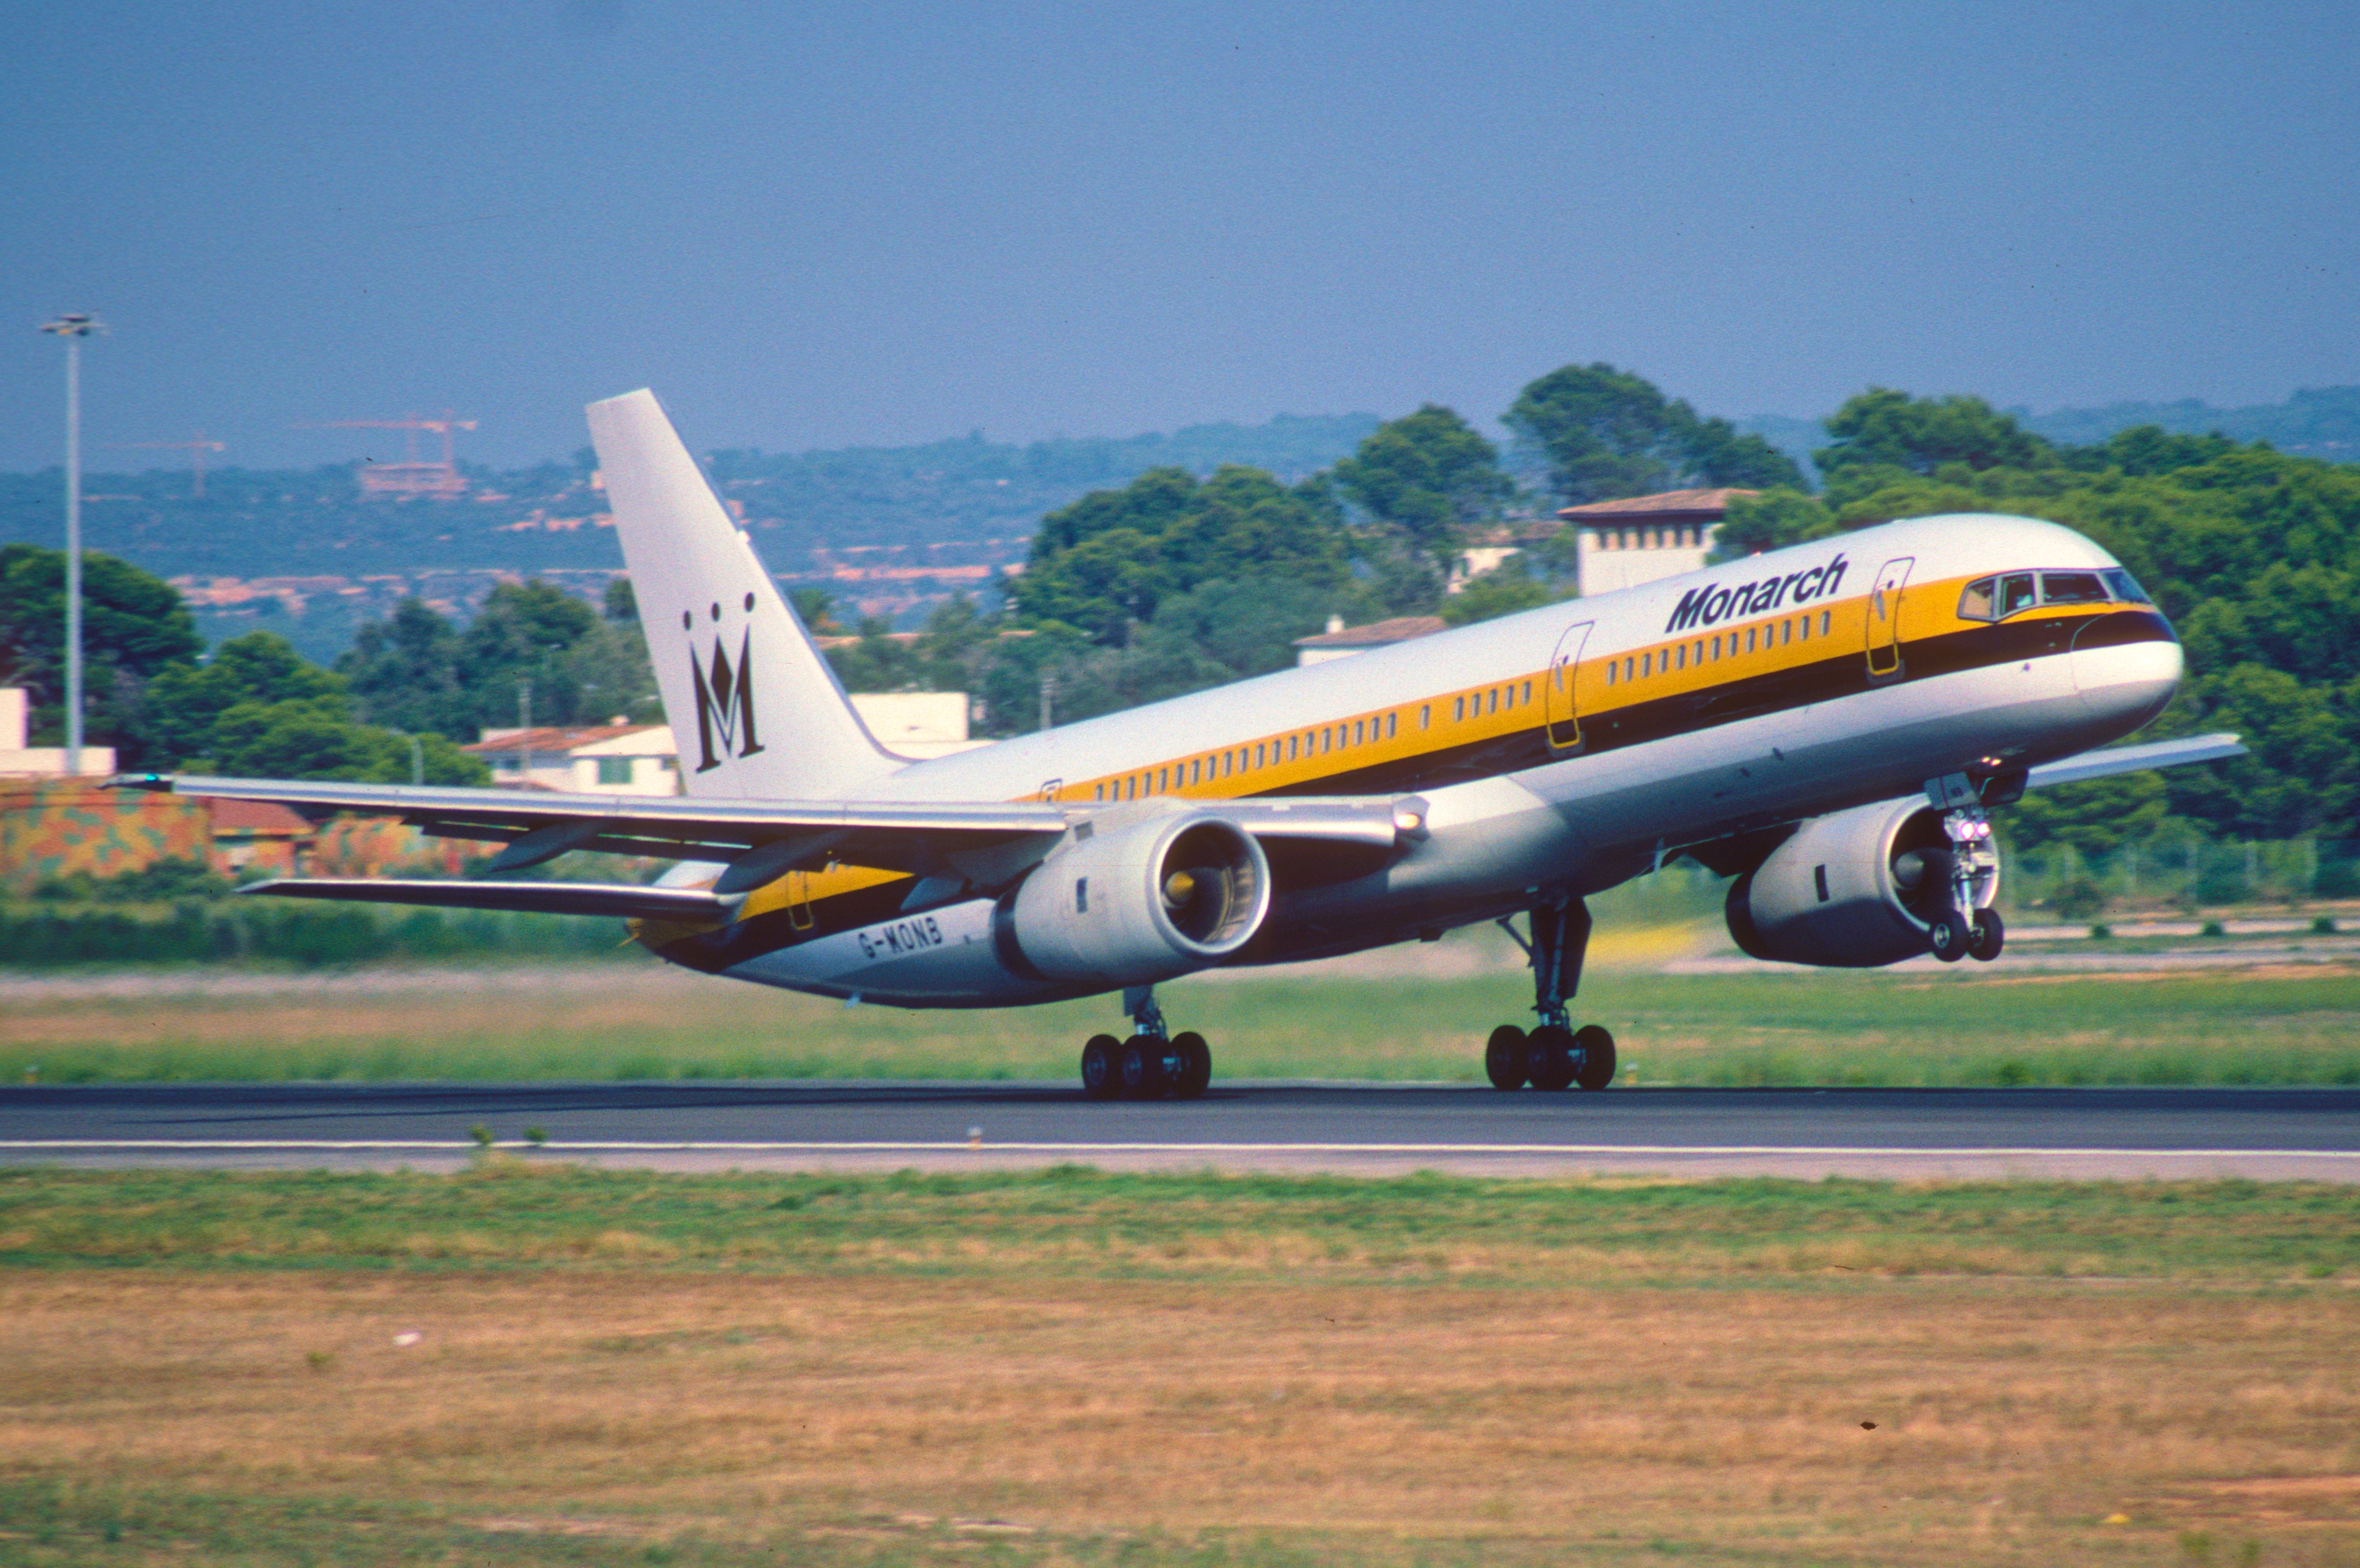 A Monarch Boeing 757 about to take off.